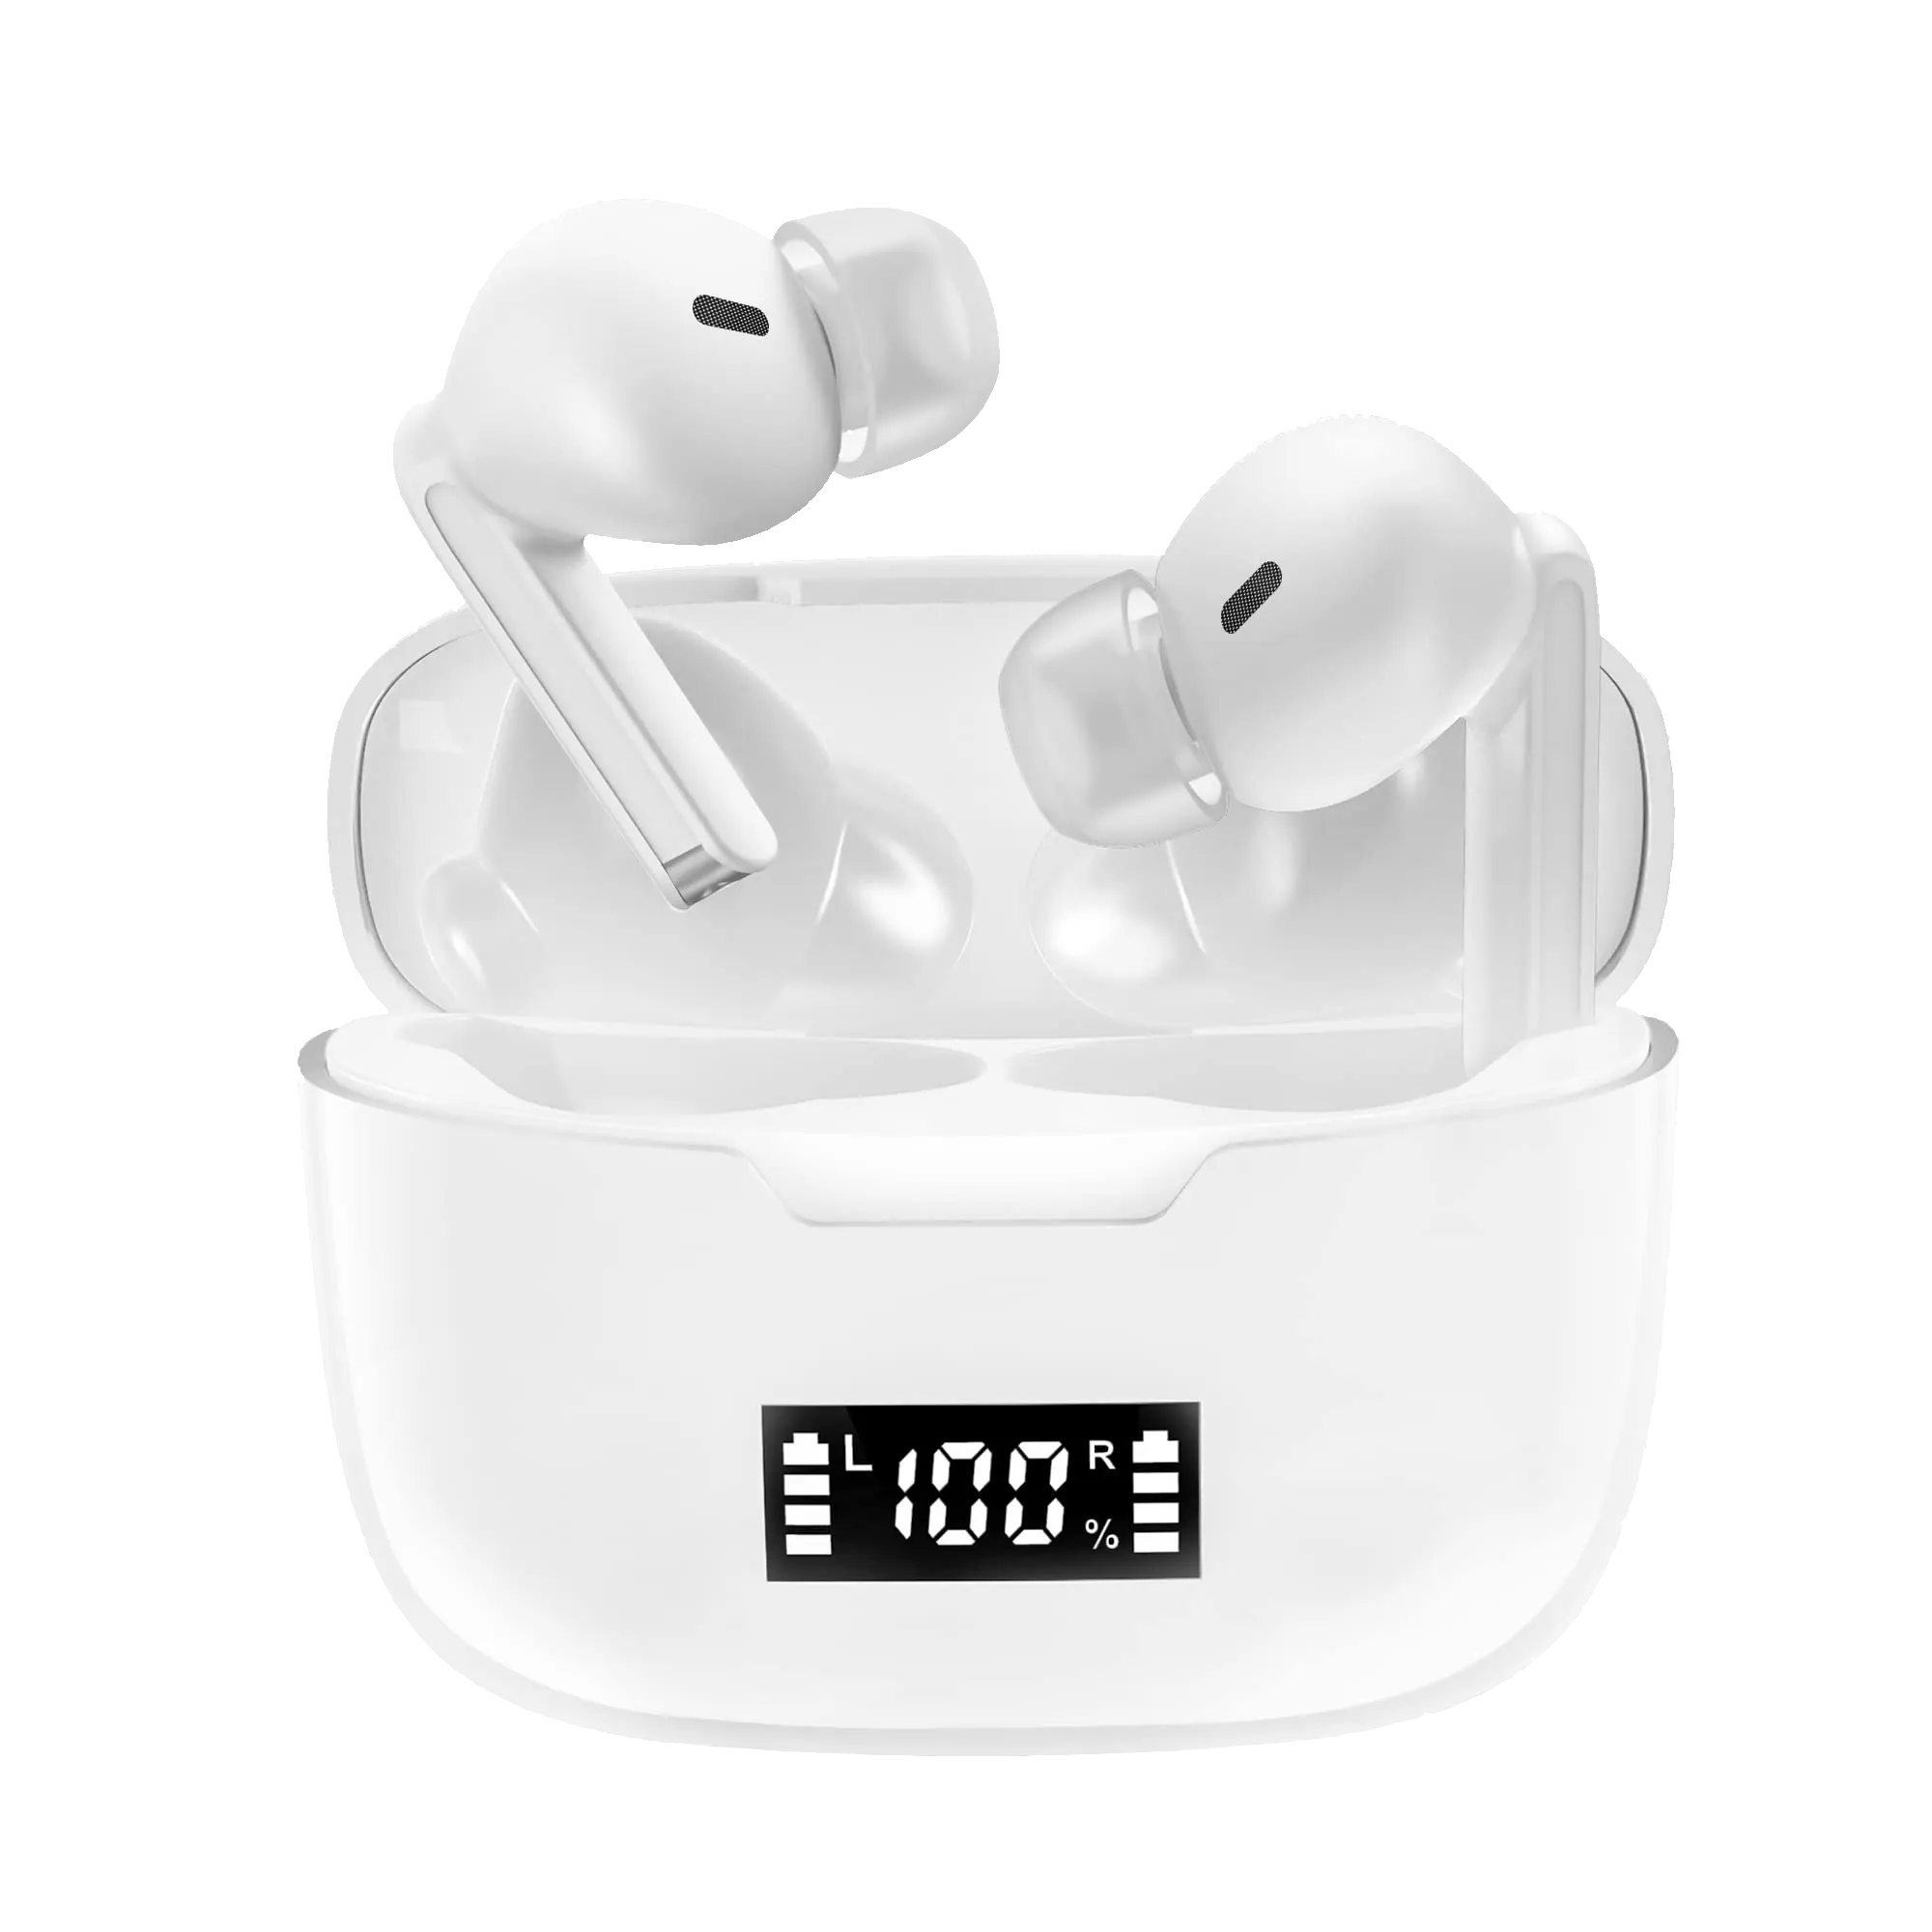 Private Model Ap09 Bass Wireless Earbuds Studio Sport Sleeping Boat Earphone In-Ear Bluetooth Auriculares Inalambricos